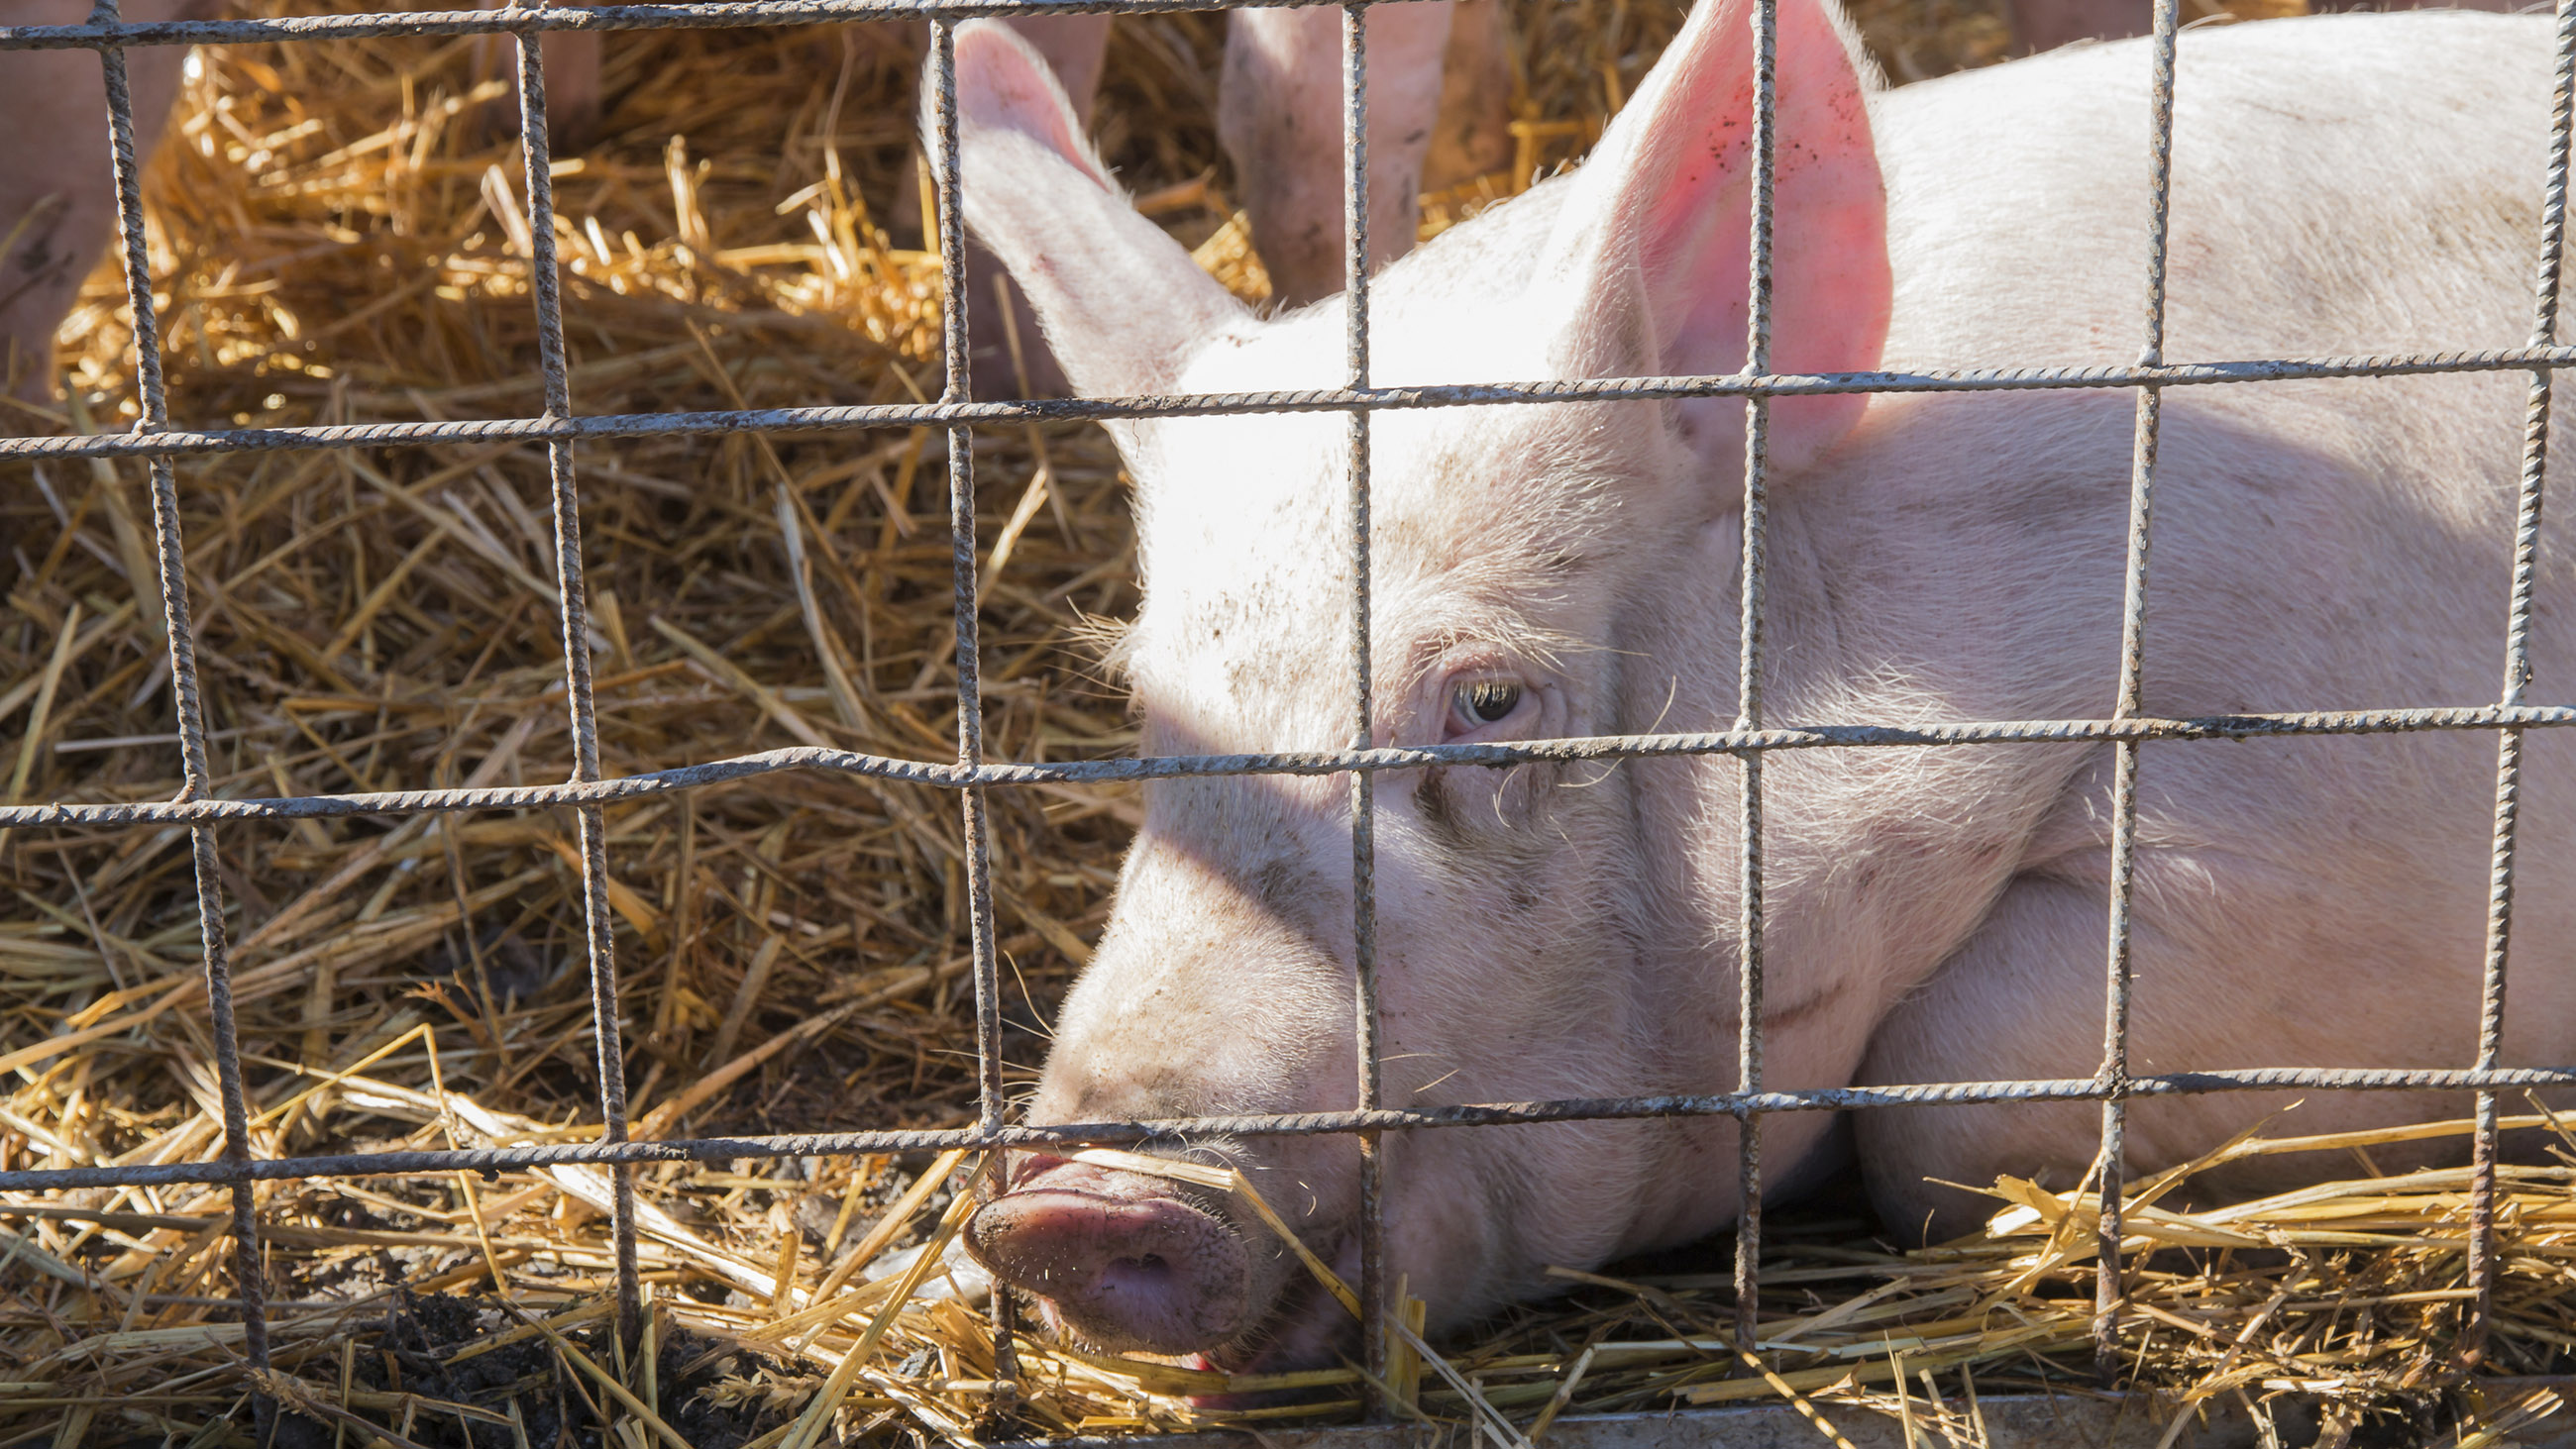 sad look of a pig in cage laying on straw